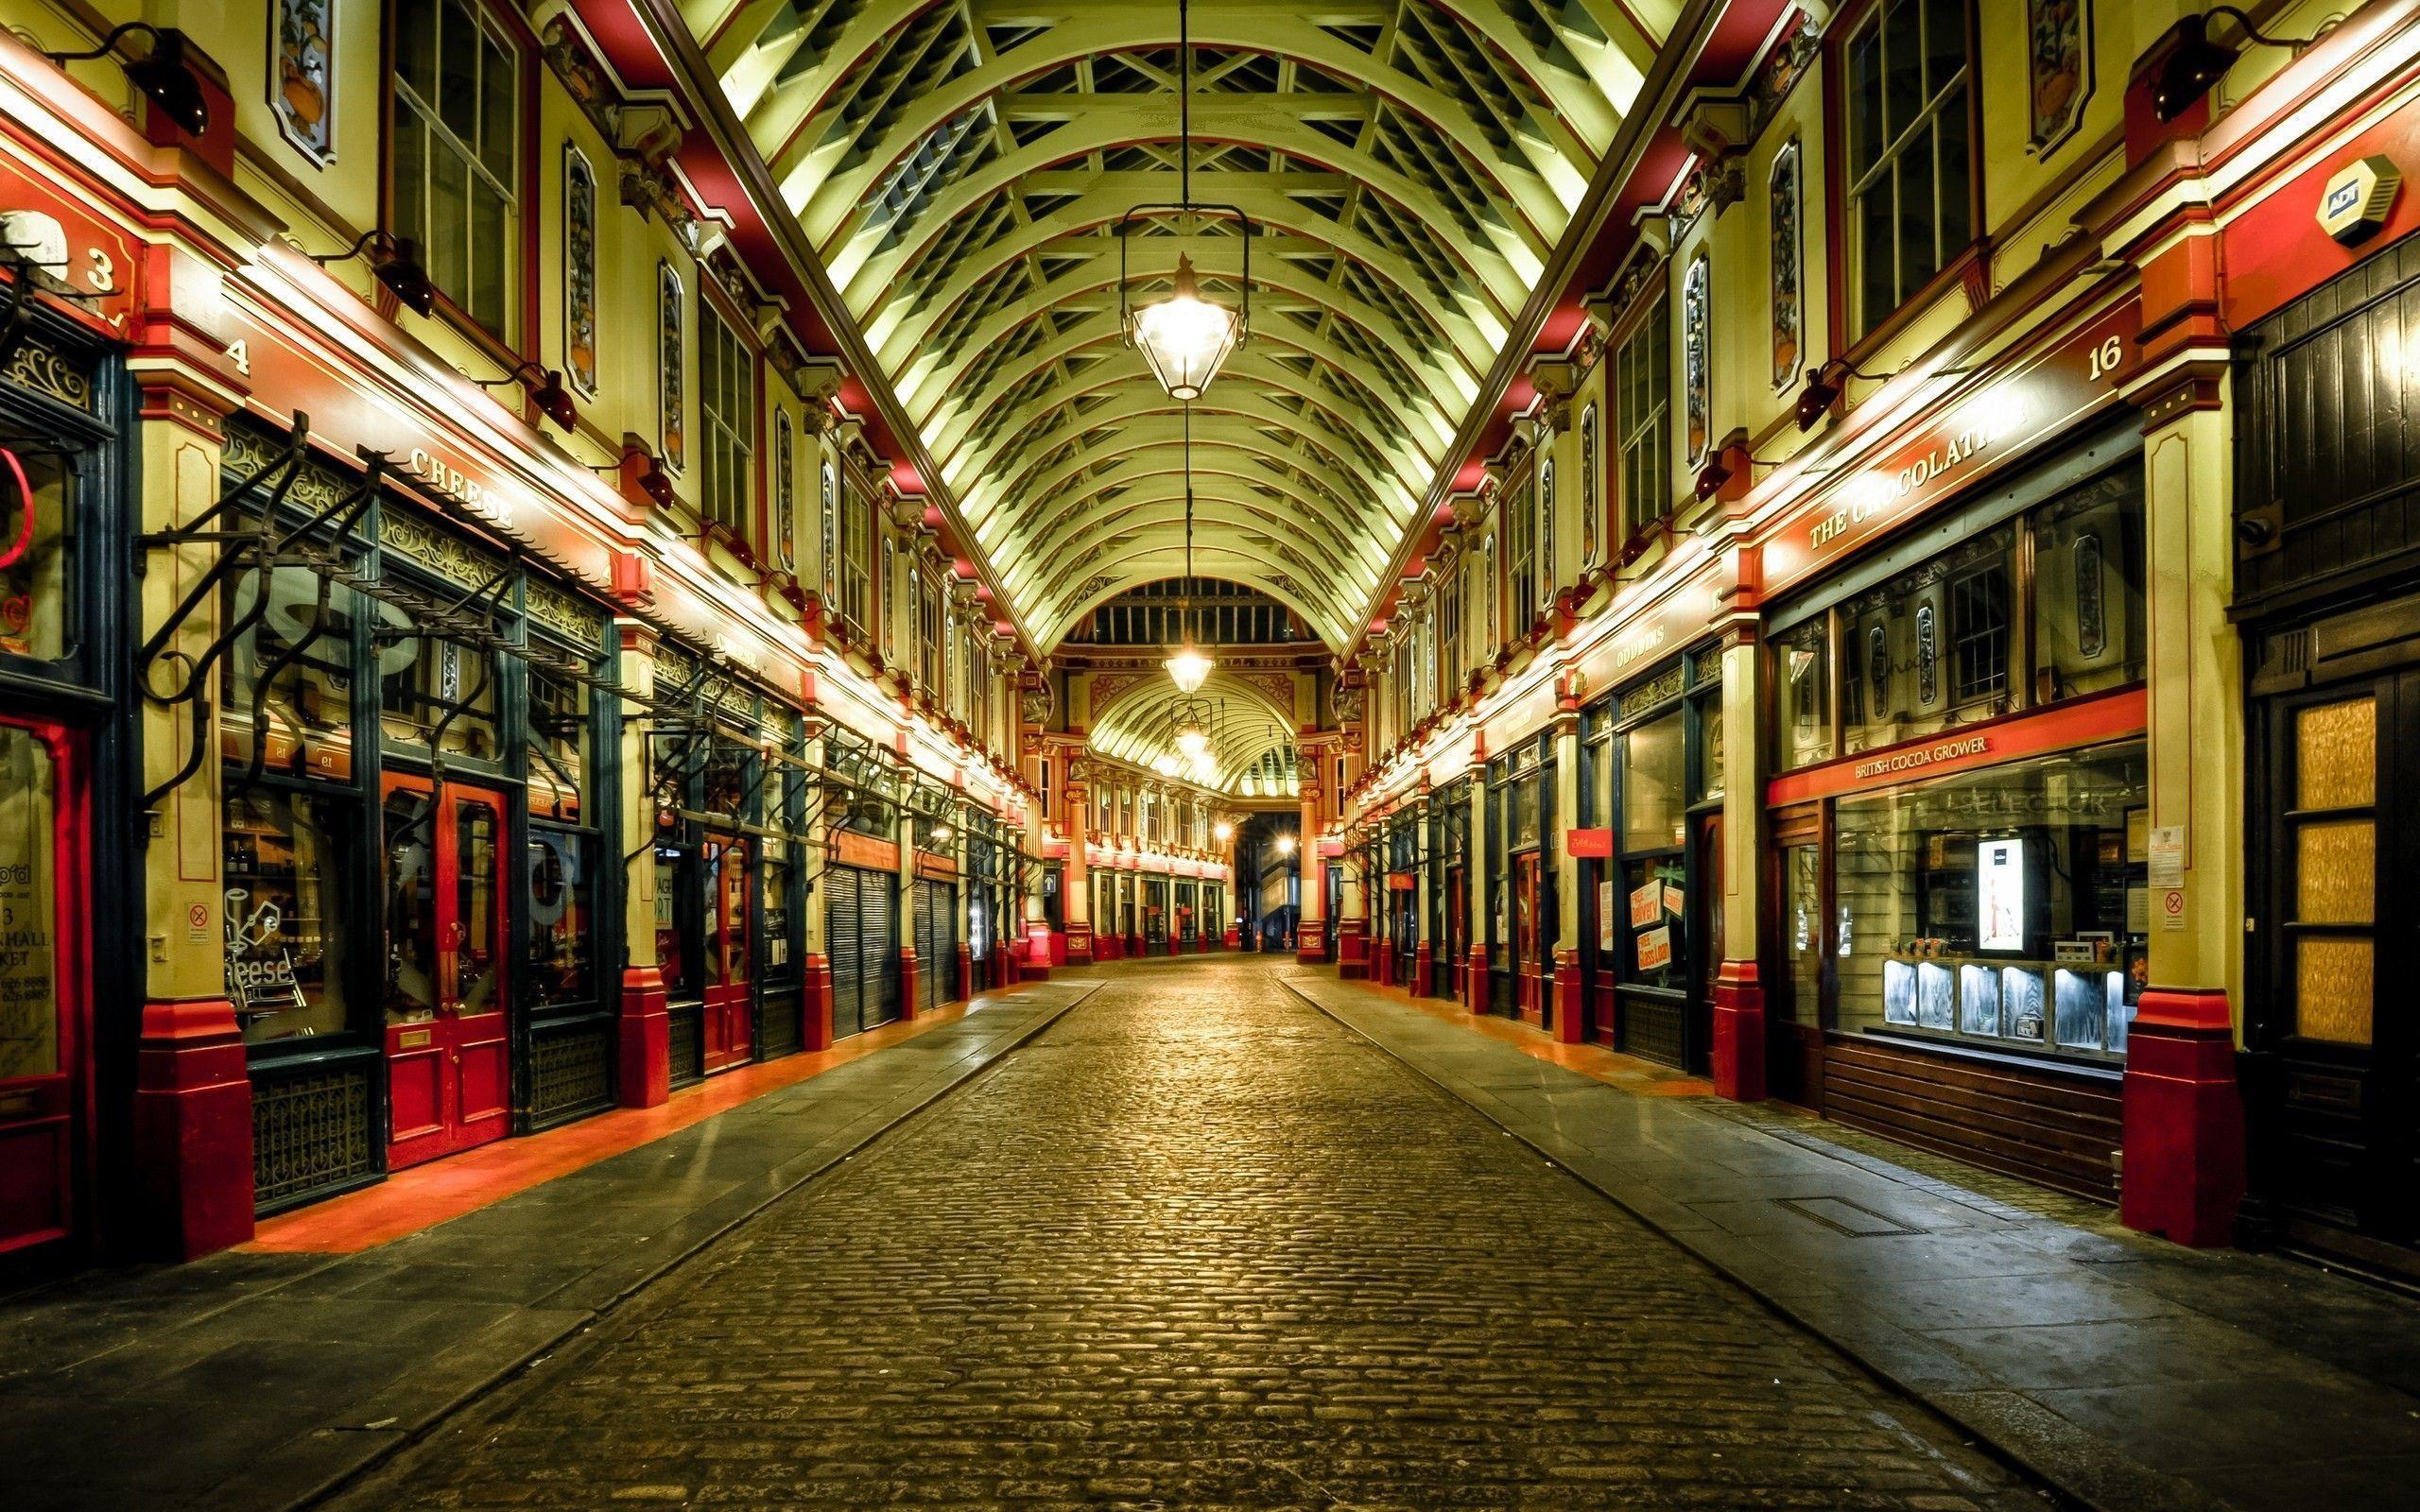 Streets of London at night wallpaper and image